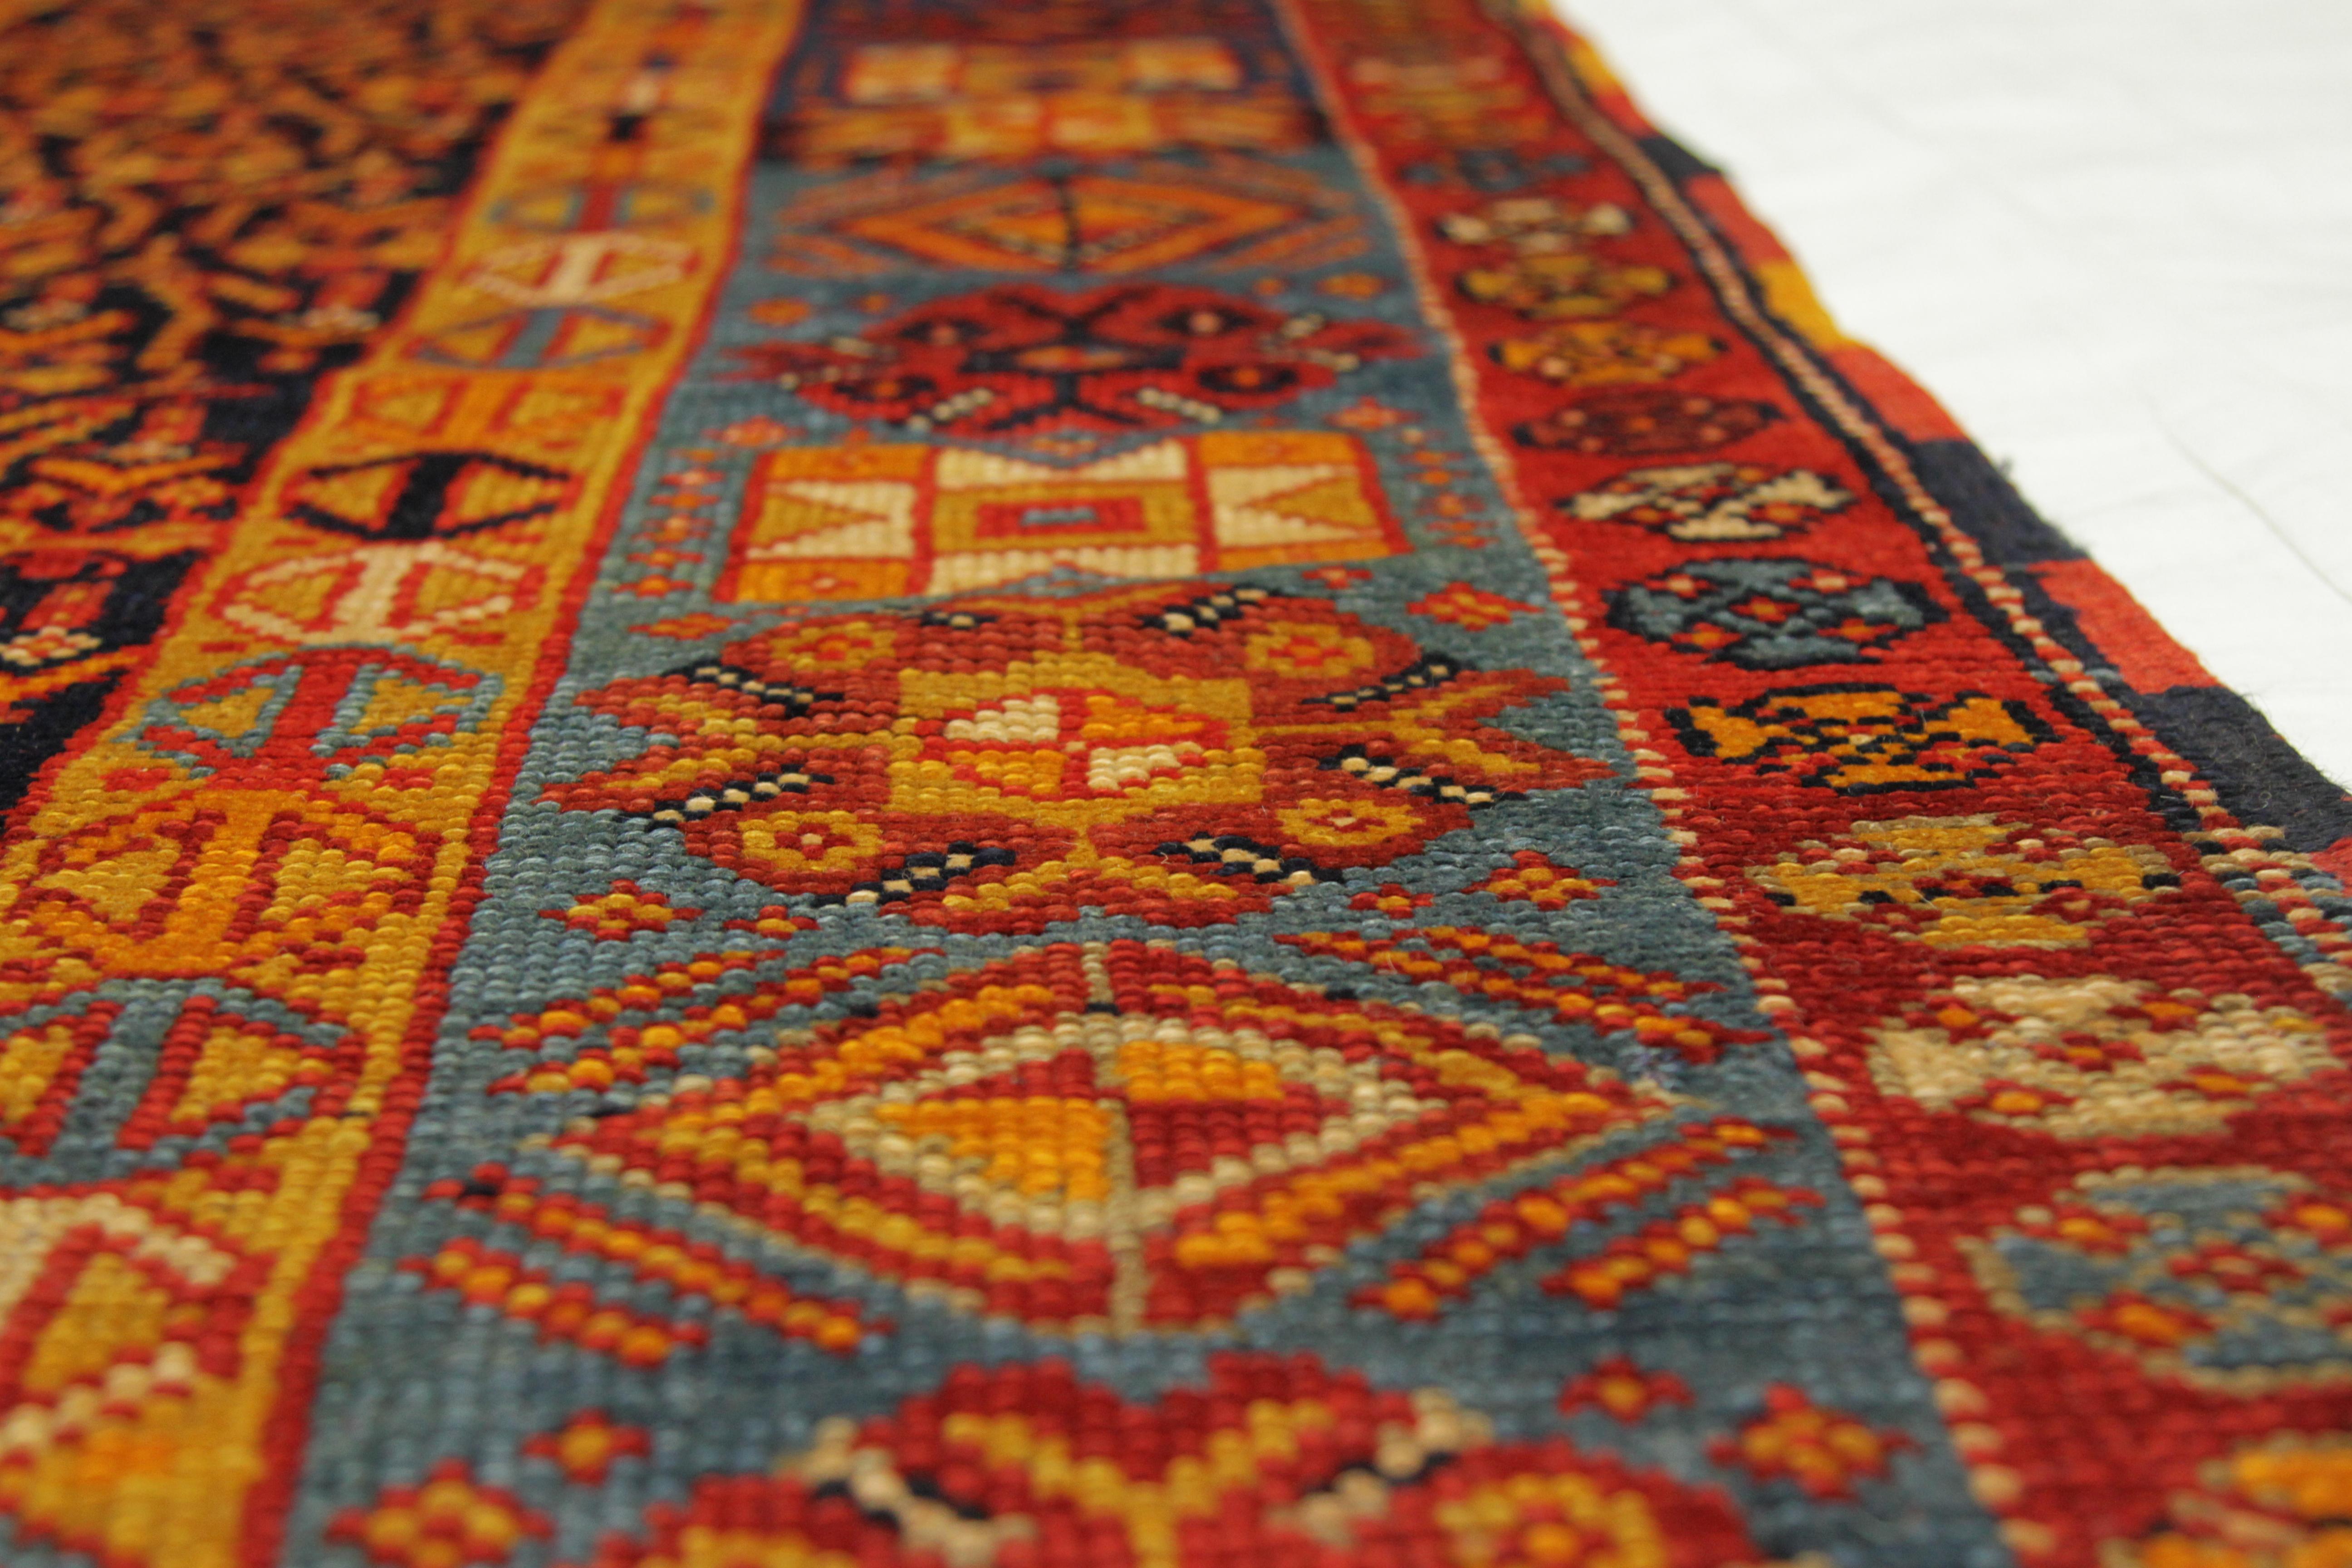 Antique Turkish Oushak Rug with Stunning Geometric Patterns, circa 1910s In Excellent Condition For Sale In Dallas, TX